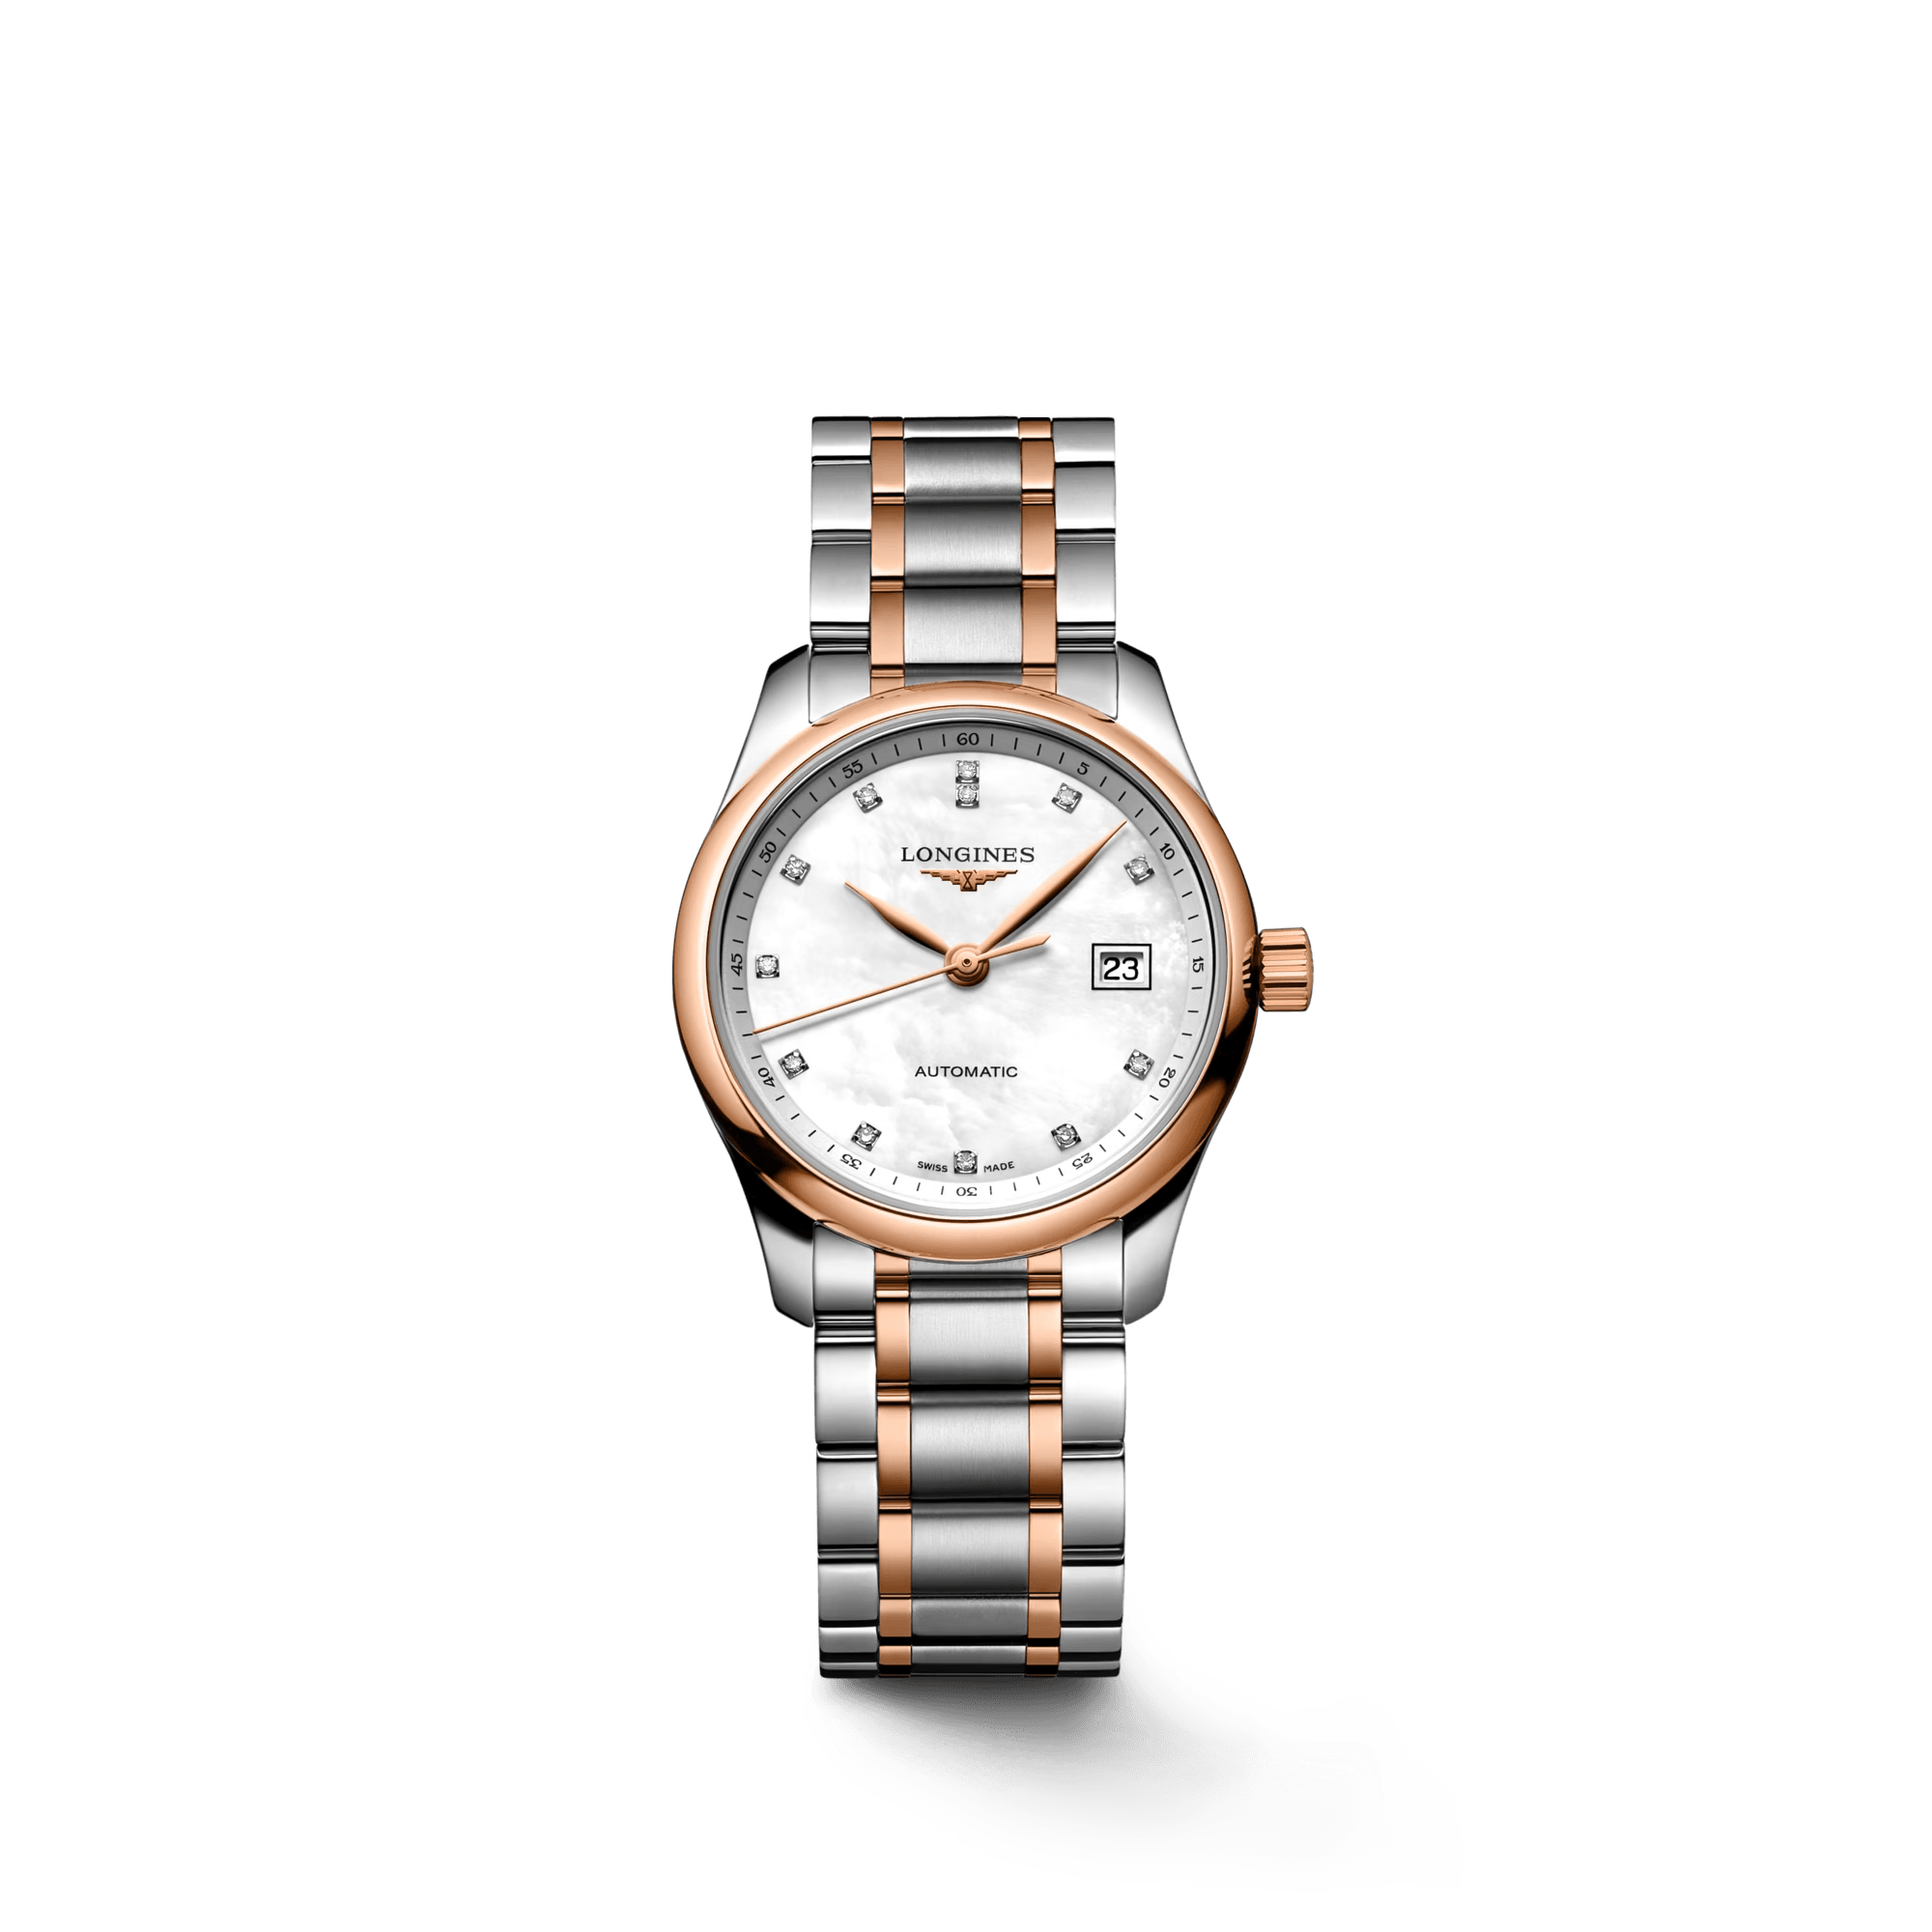 The Longines Master Collection Automatic Women's Watch L22575897